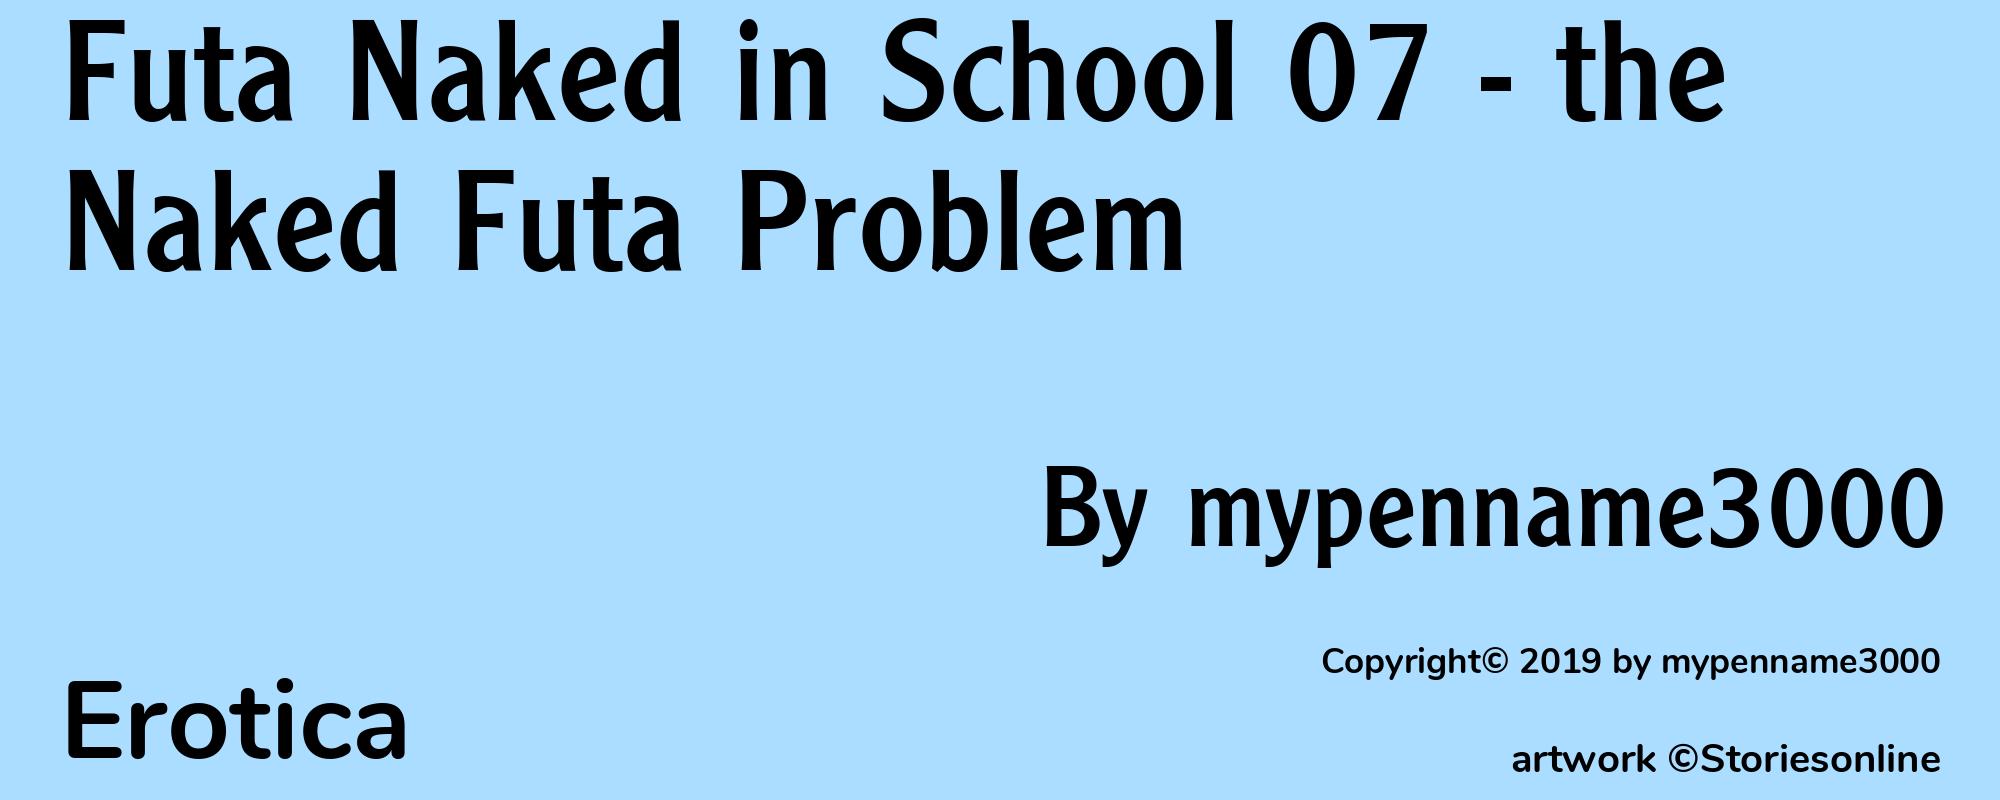 Futa Naked in School 07 - the Naked Futa Problem - Cover